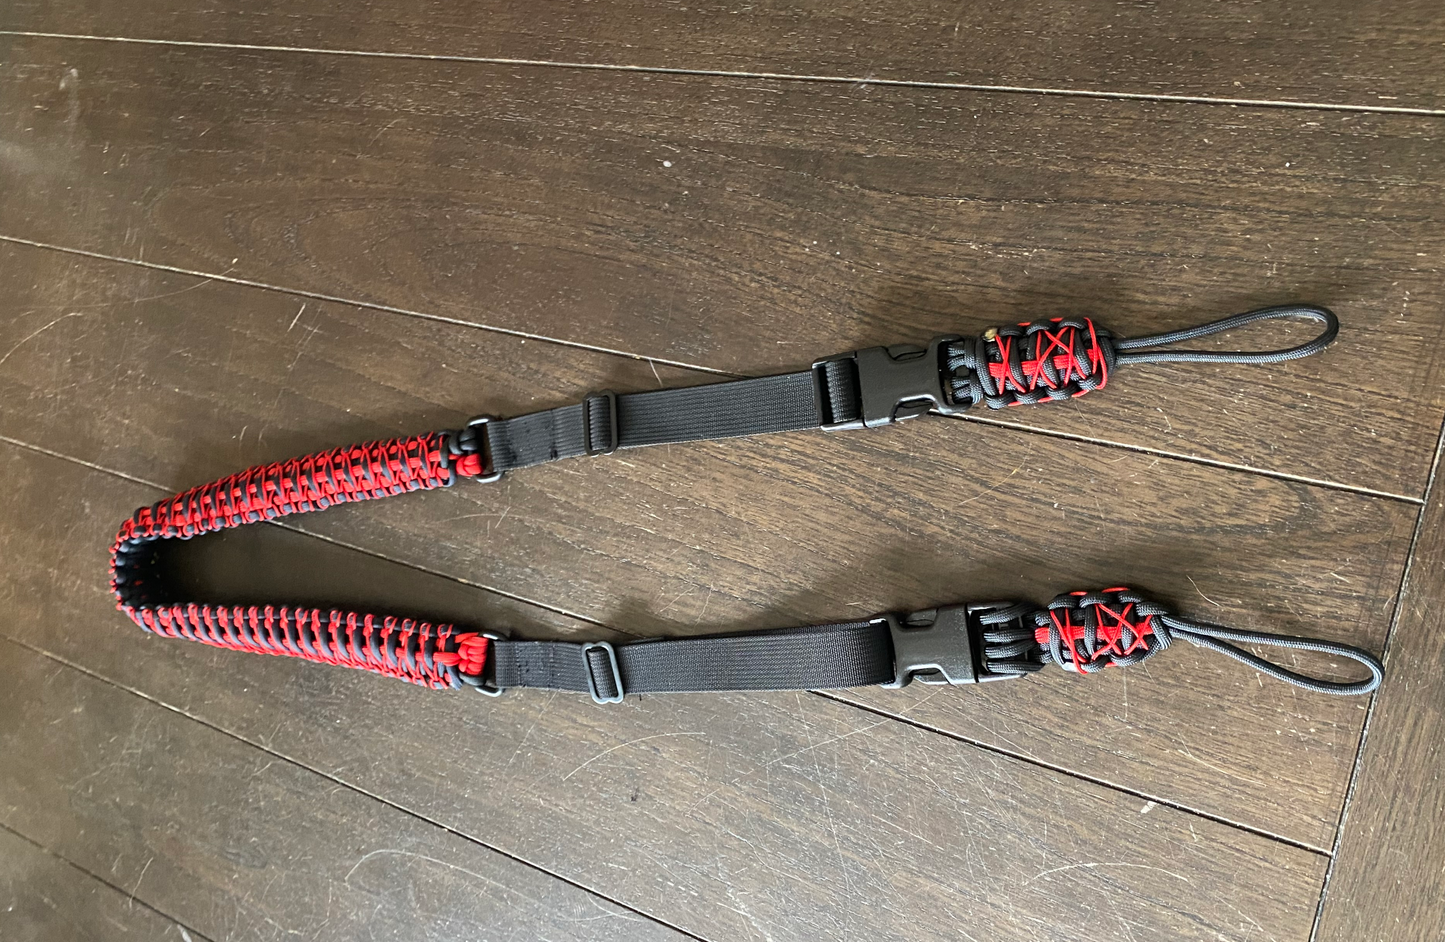 Adjustable Paracord Double Cobra Shoulder Bow Sling, Black and Red with Red Herringbone Stitching and 550 Middle